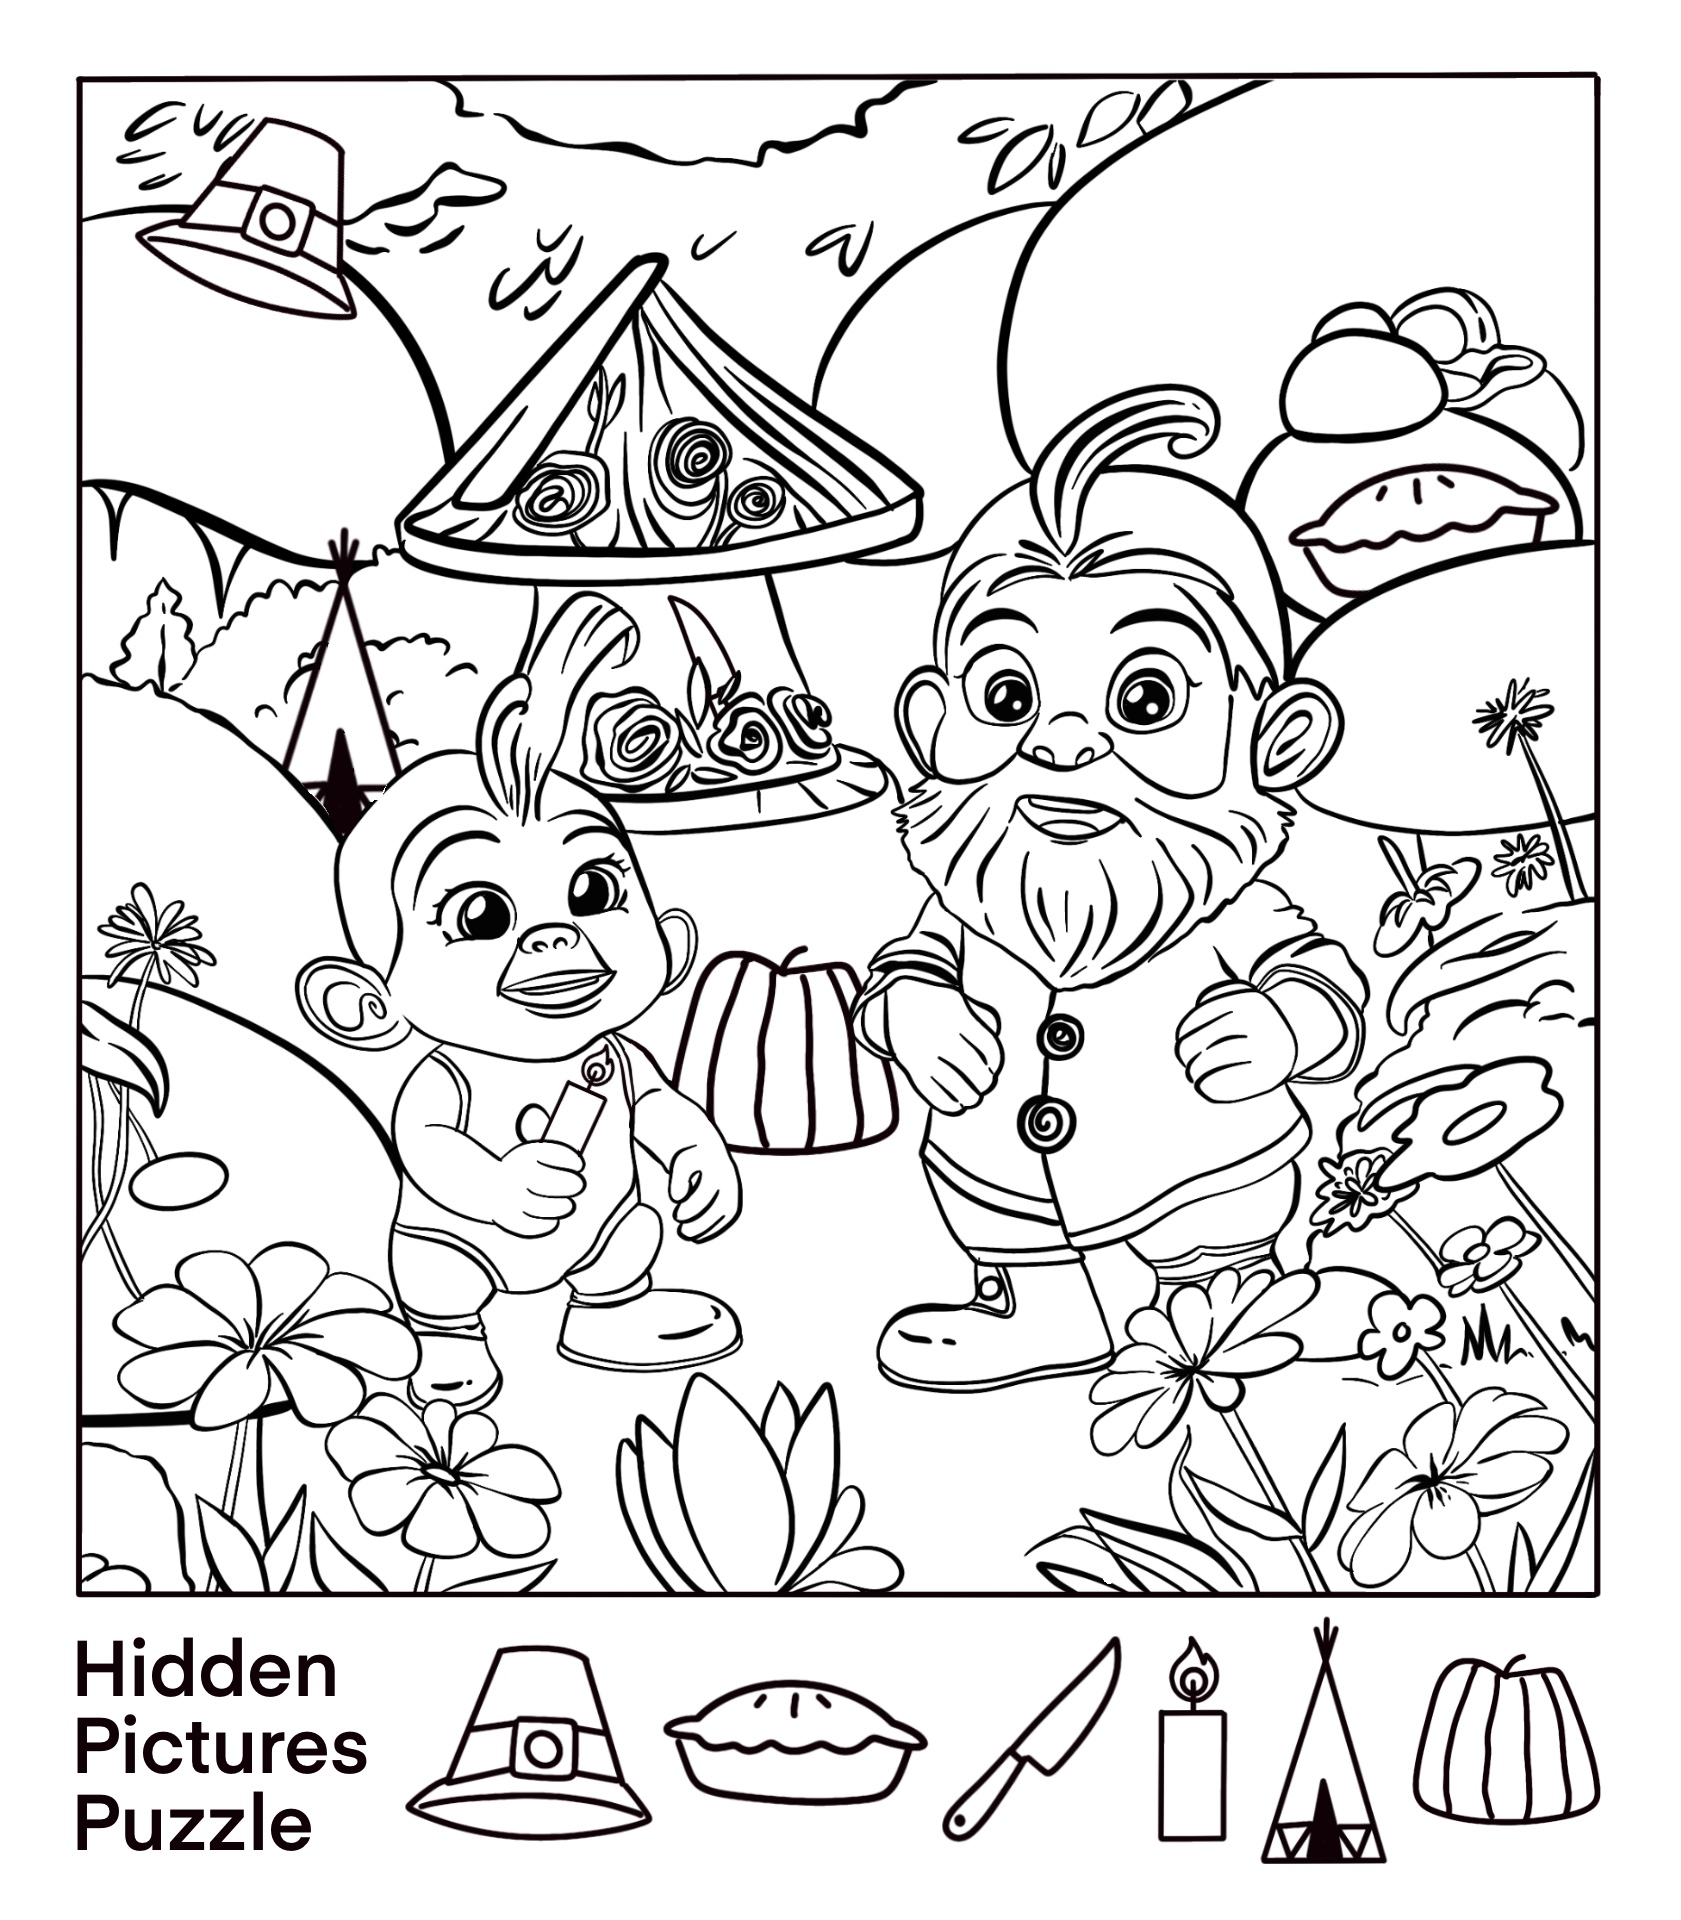 hidden-pictures-printable-printable-world-holiday